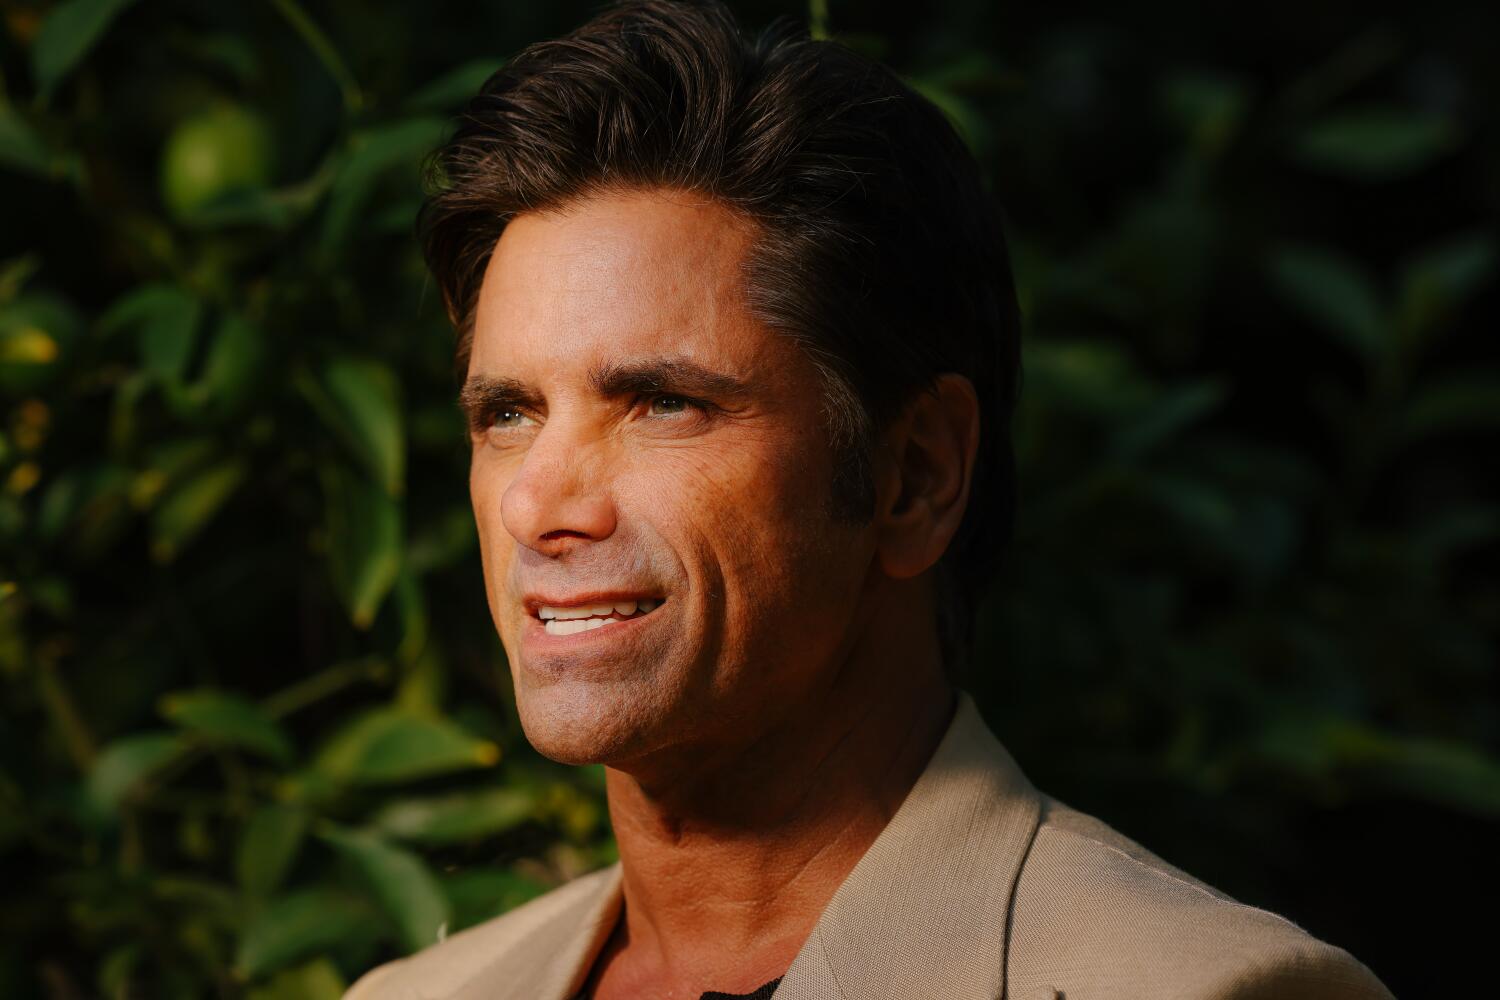 Over a Greek dish, John Stamos reflects on how his parents, grief and sobriety shaped his memoir